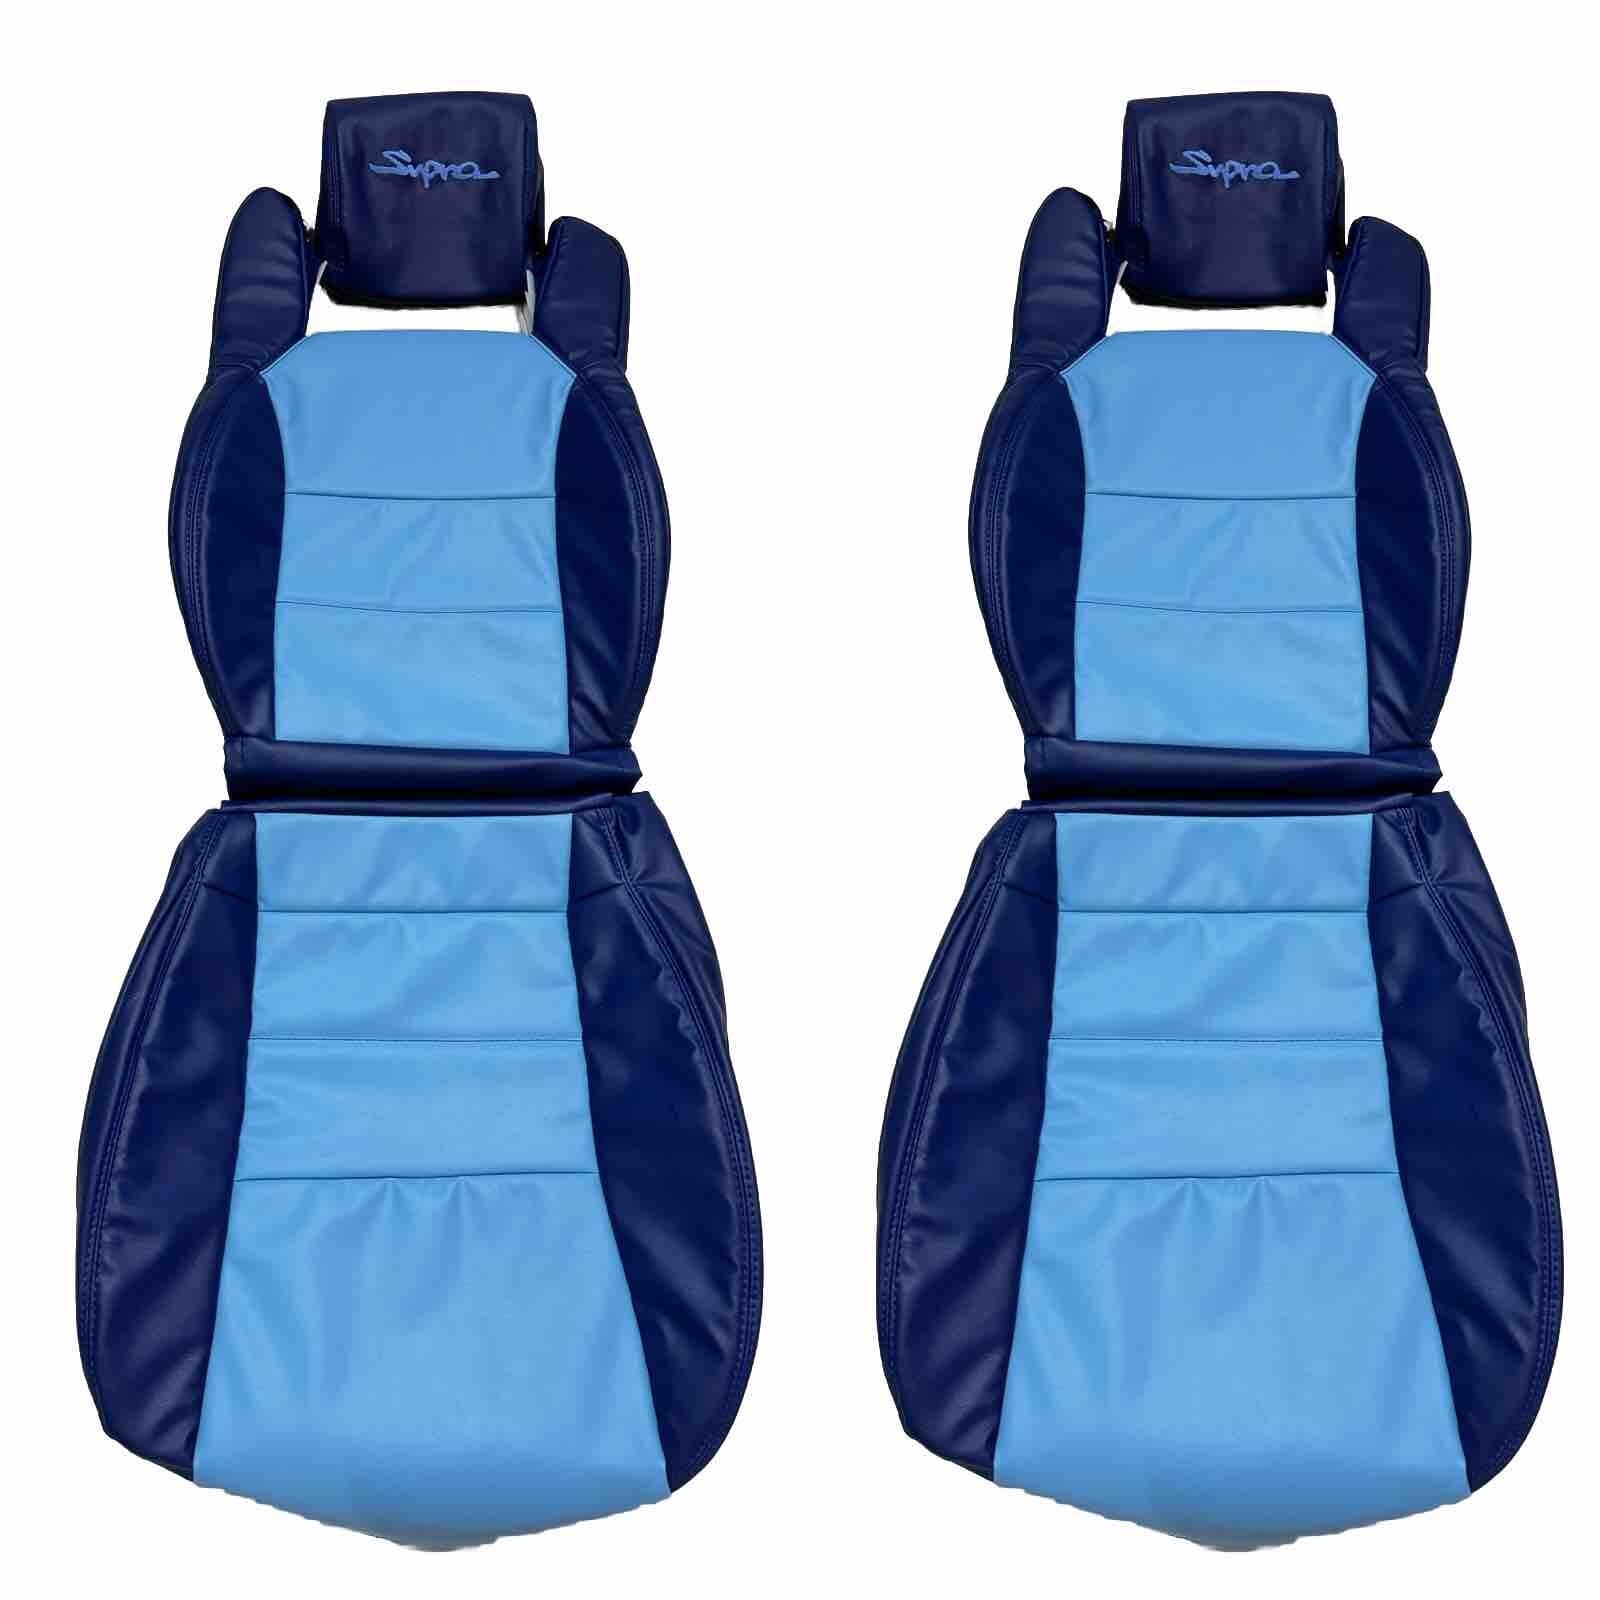 Toyota Supra MK3 / MKIII 1986-1992 Synthetic Leather SeatCovers In Blue Color